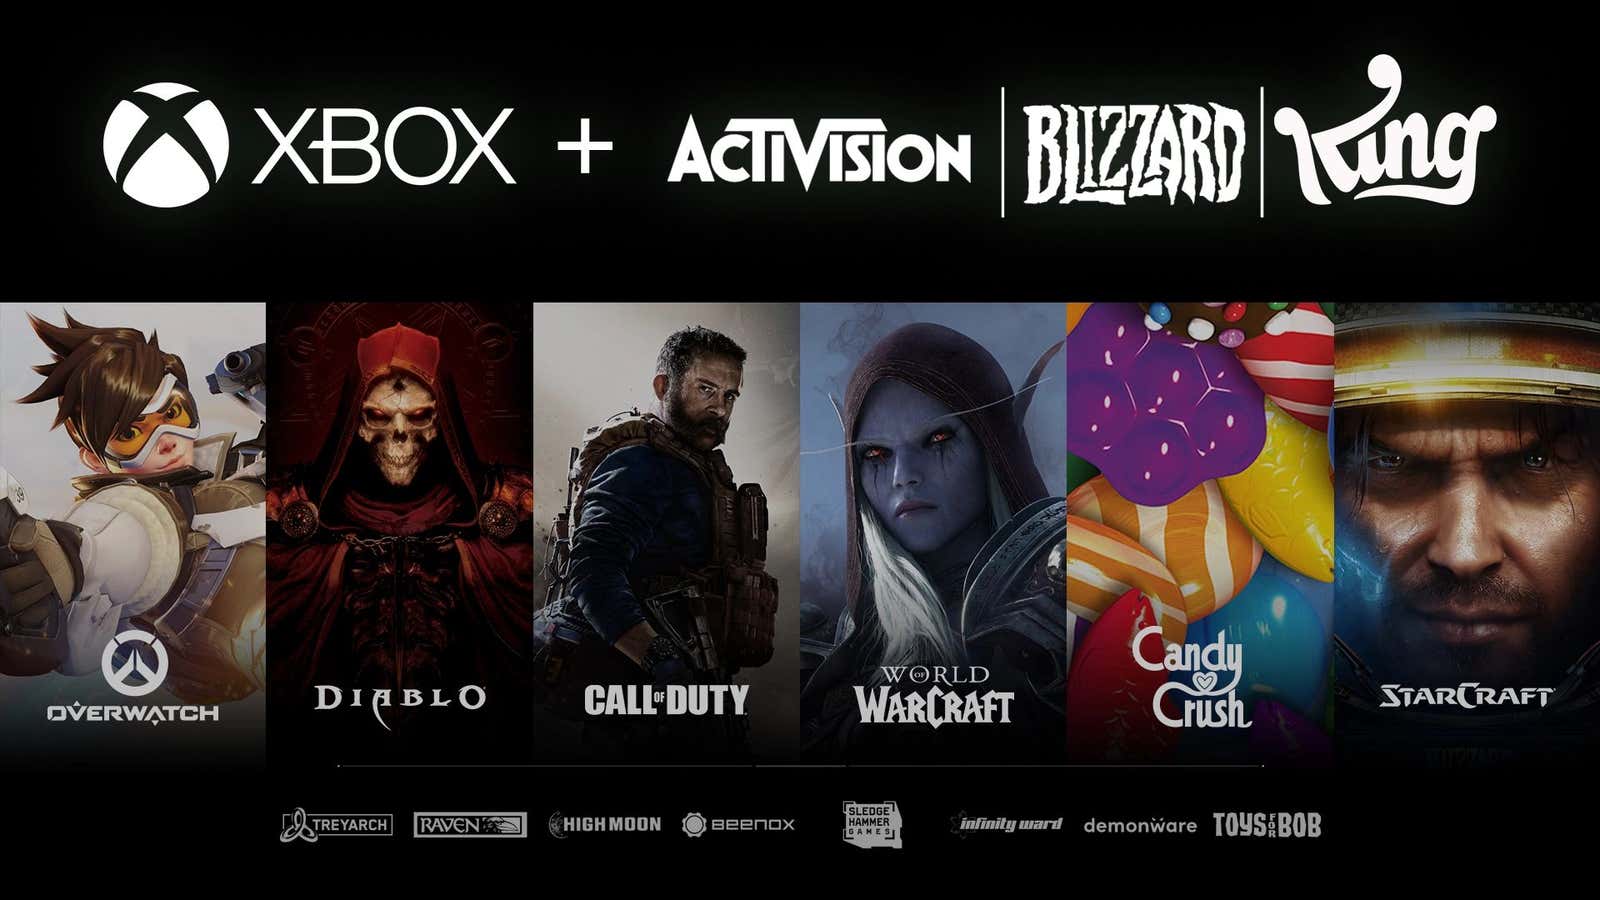 Microsoft now owns Activision-Blizzard-King and all of its franchises